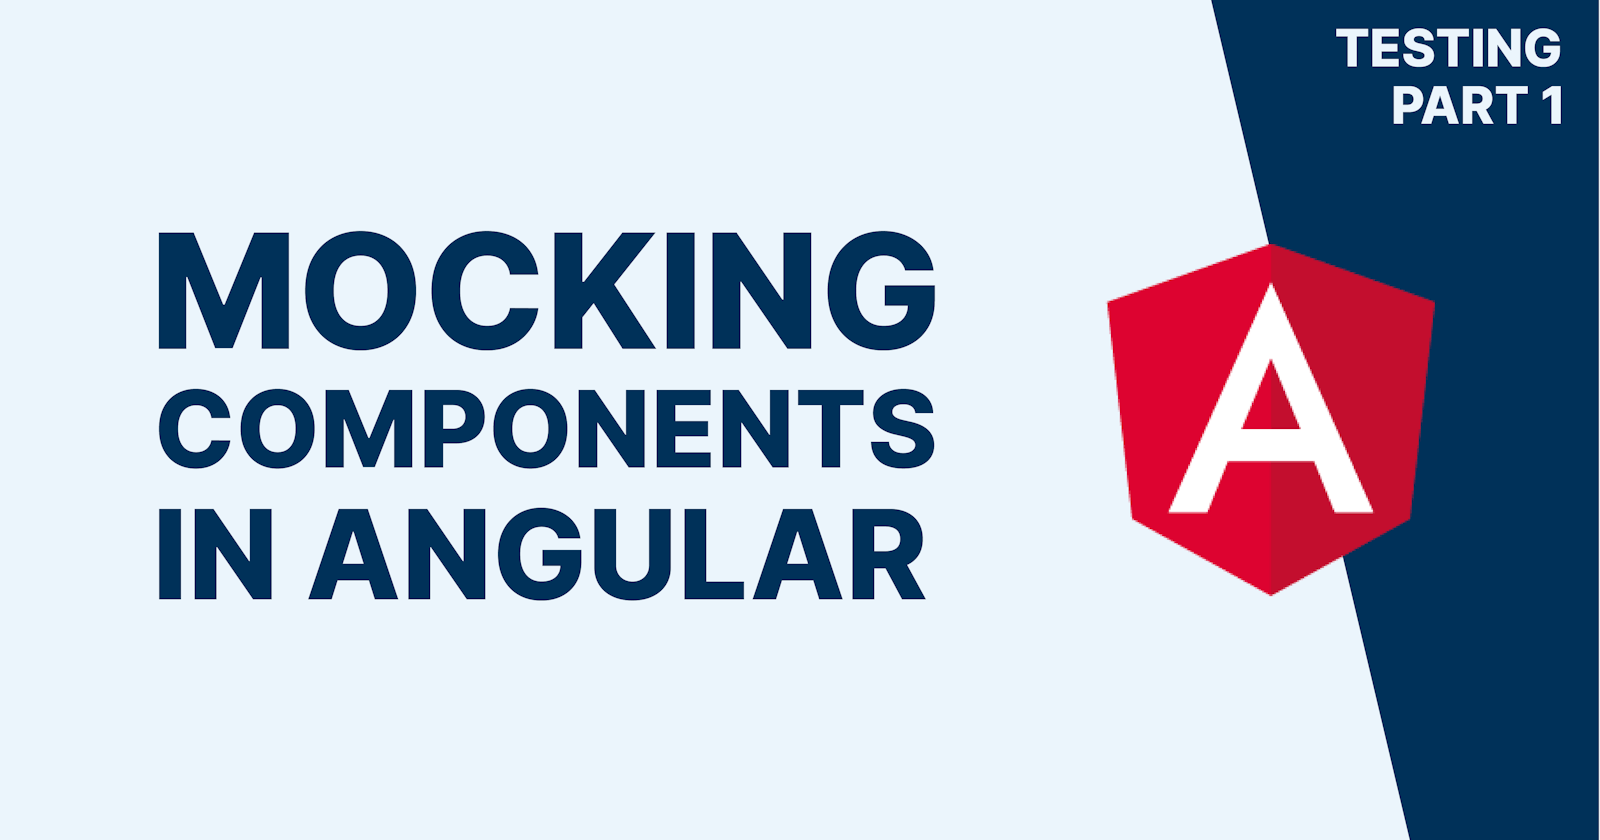 Mocking Components in Angular